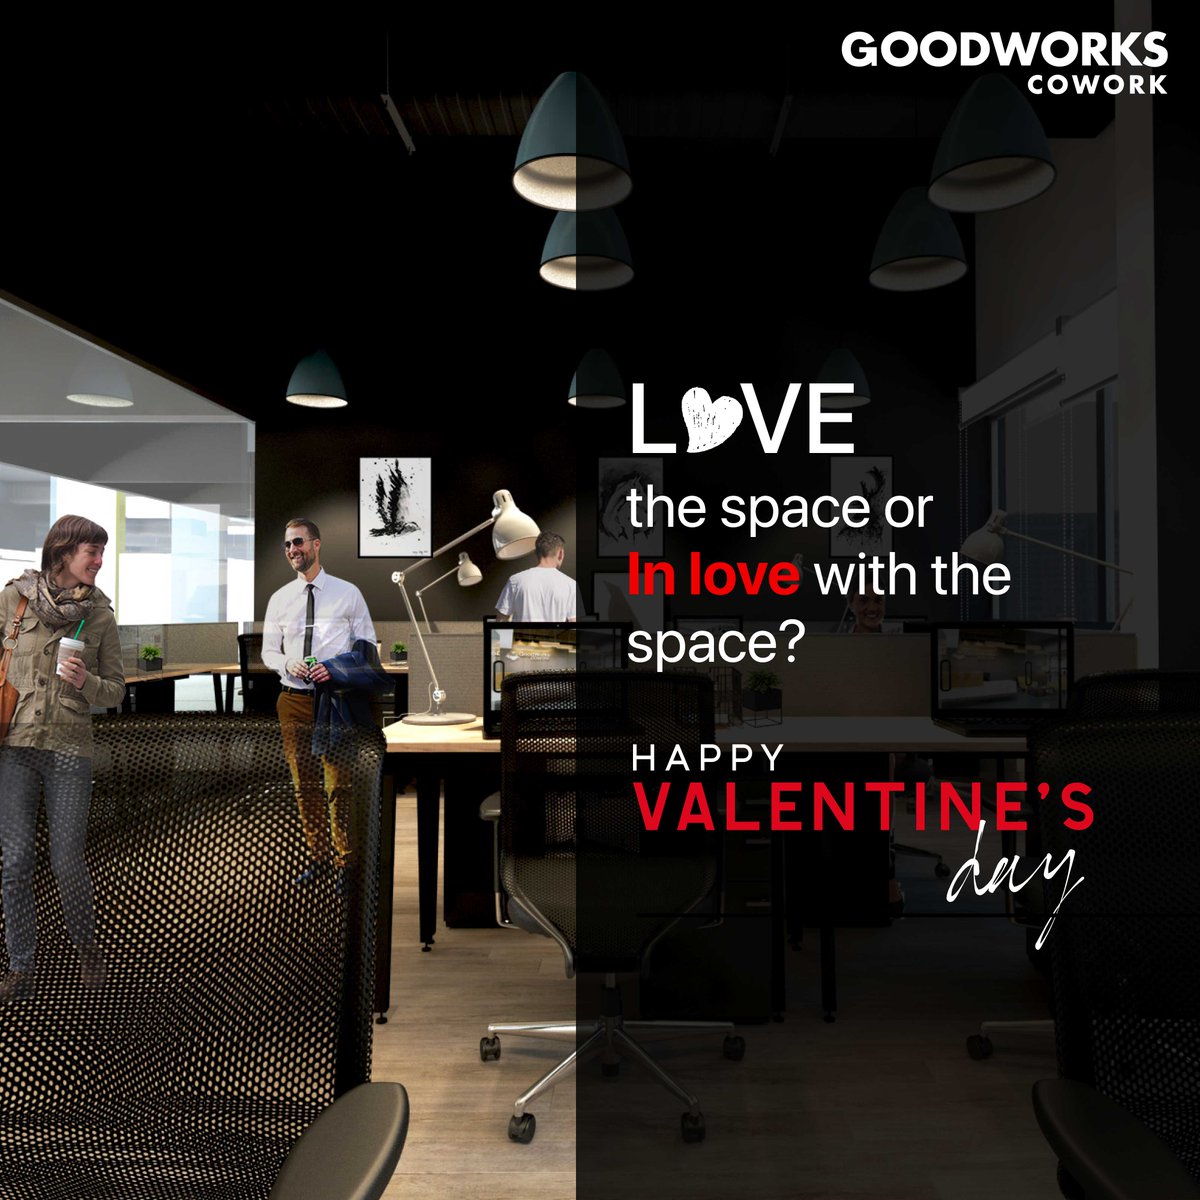 Sending love and sweetness your way this Valentine's Day! Wishing you a day filled with joy, laughter, and unforgettable moments with the ones you love. #GoodWorksCowork #Cowork #GoodWorks #ValentinesDay #Valentine #Love #Tech #ValentinesDay2024 #HappyValentinesDay